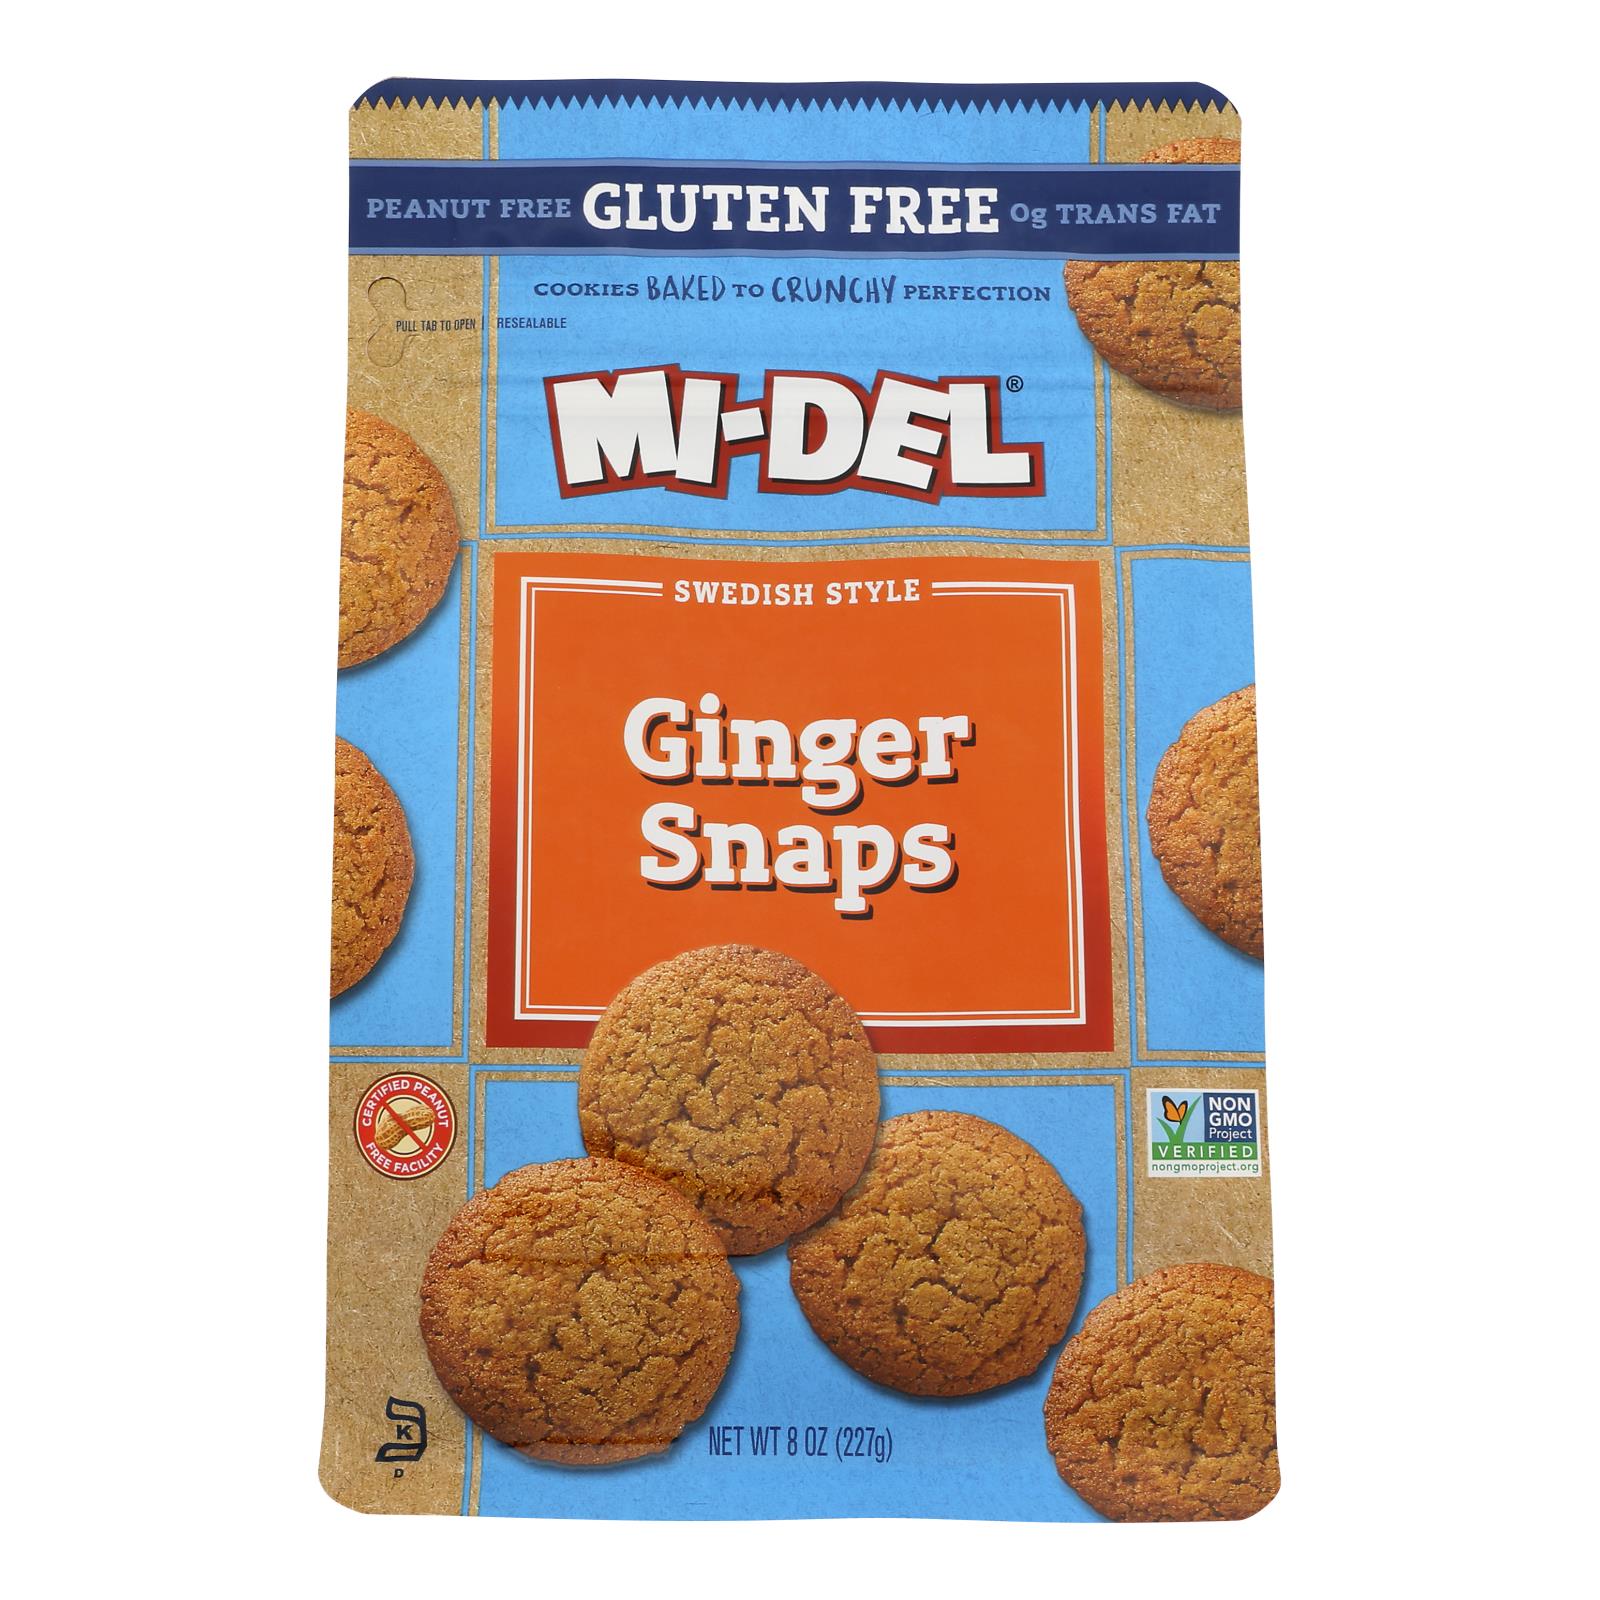 Midel Cookies - Ginger Snaps - Case Of 8 - 8 Oz